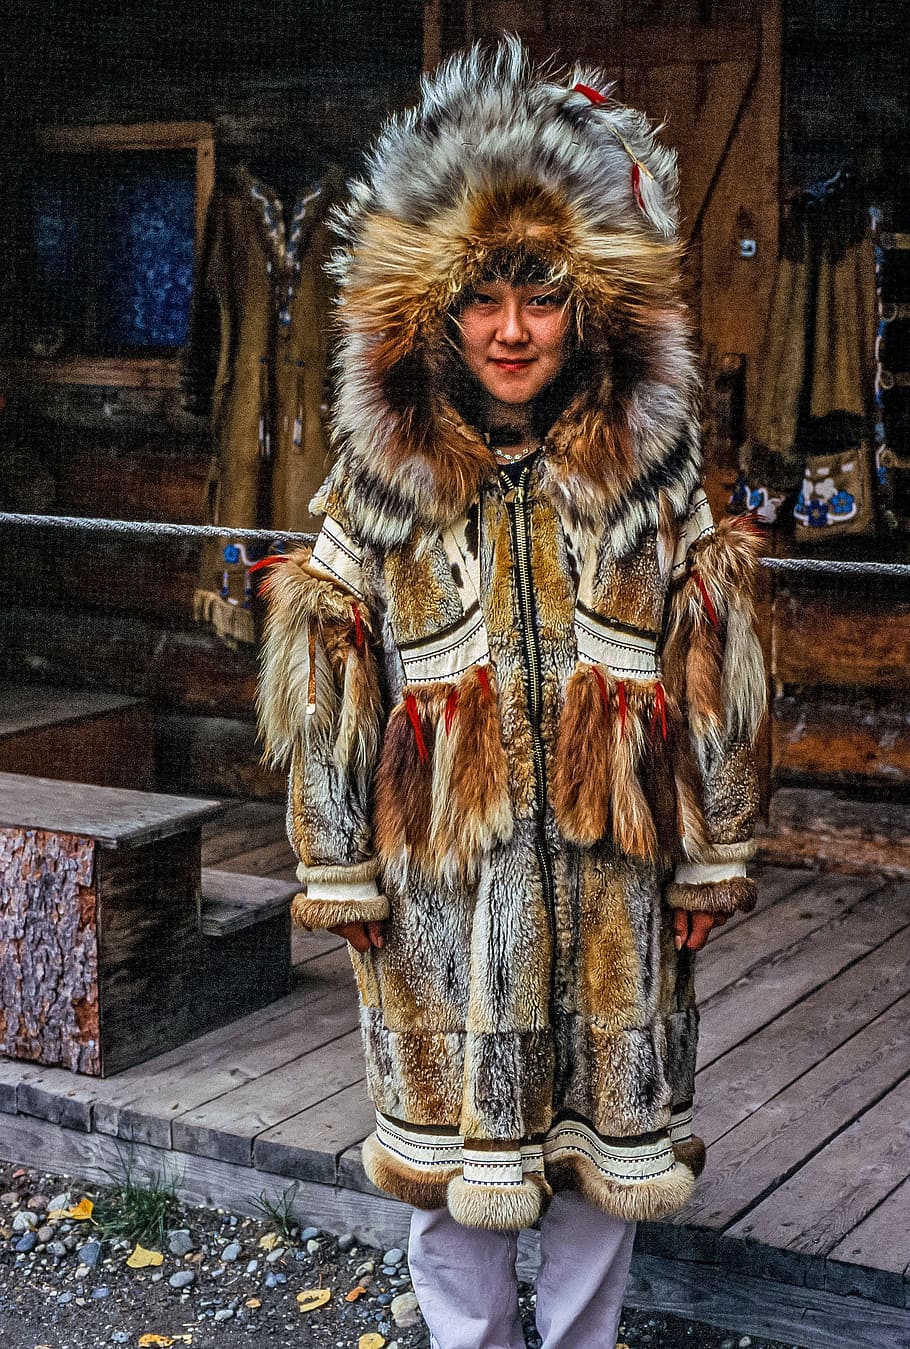 Young american woman in the traditional fur clothing of her native tribe